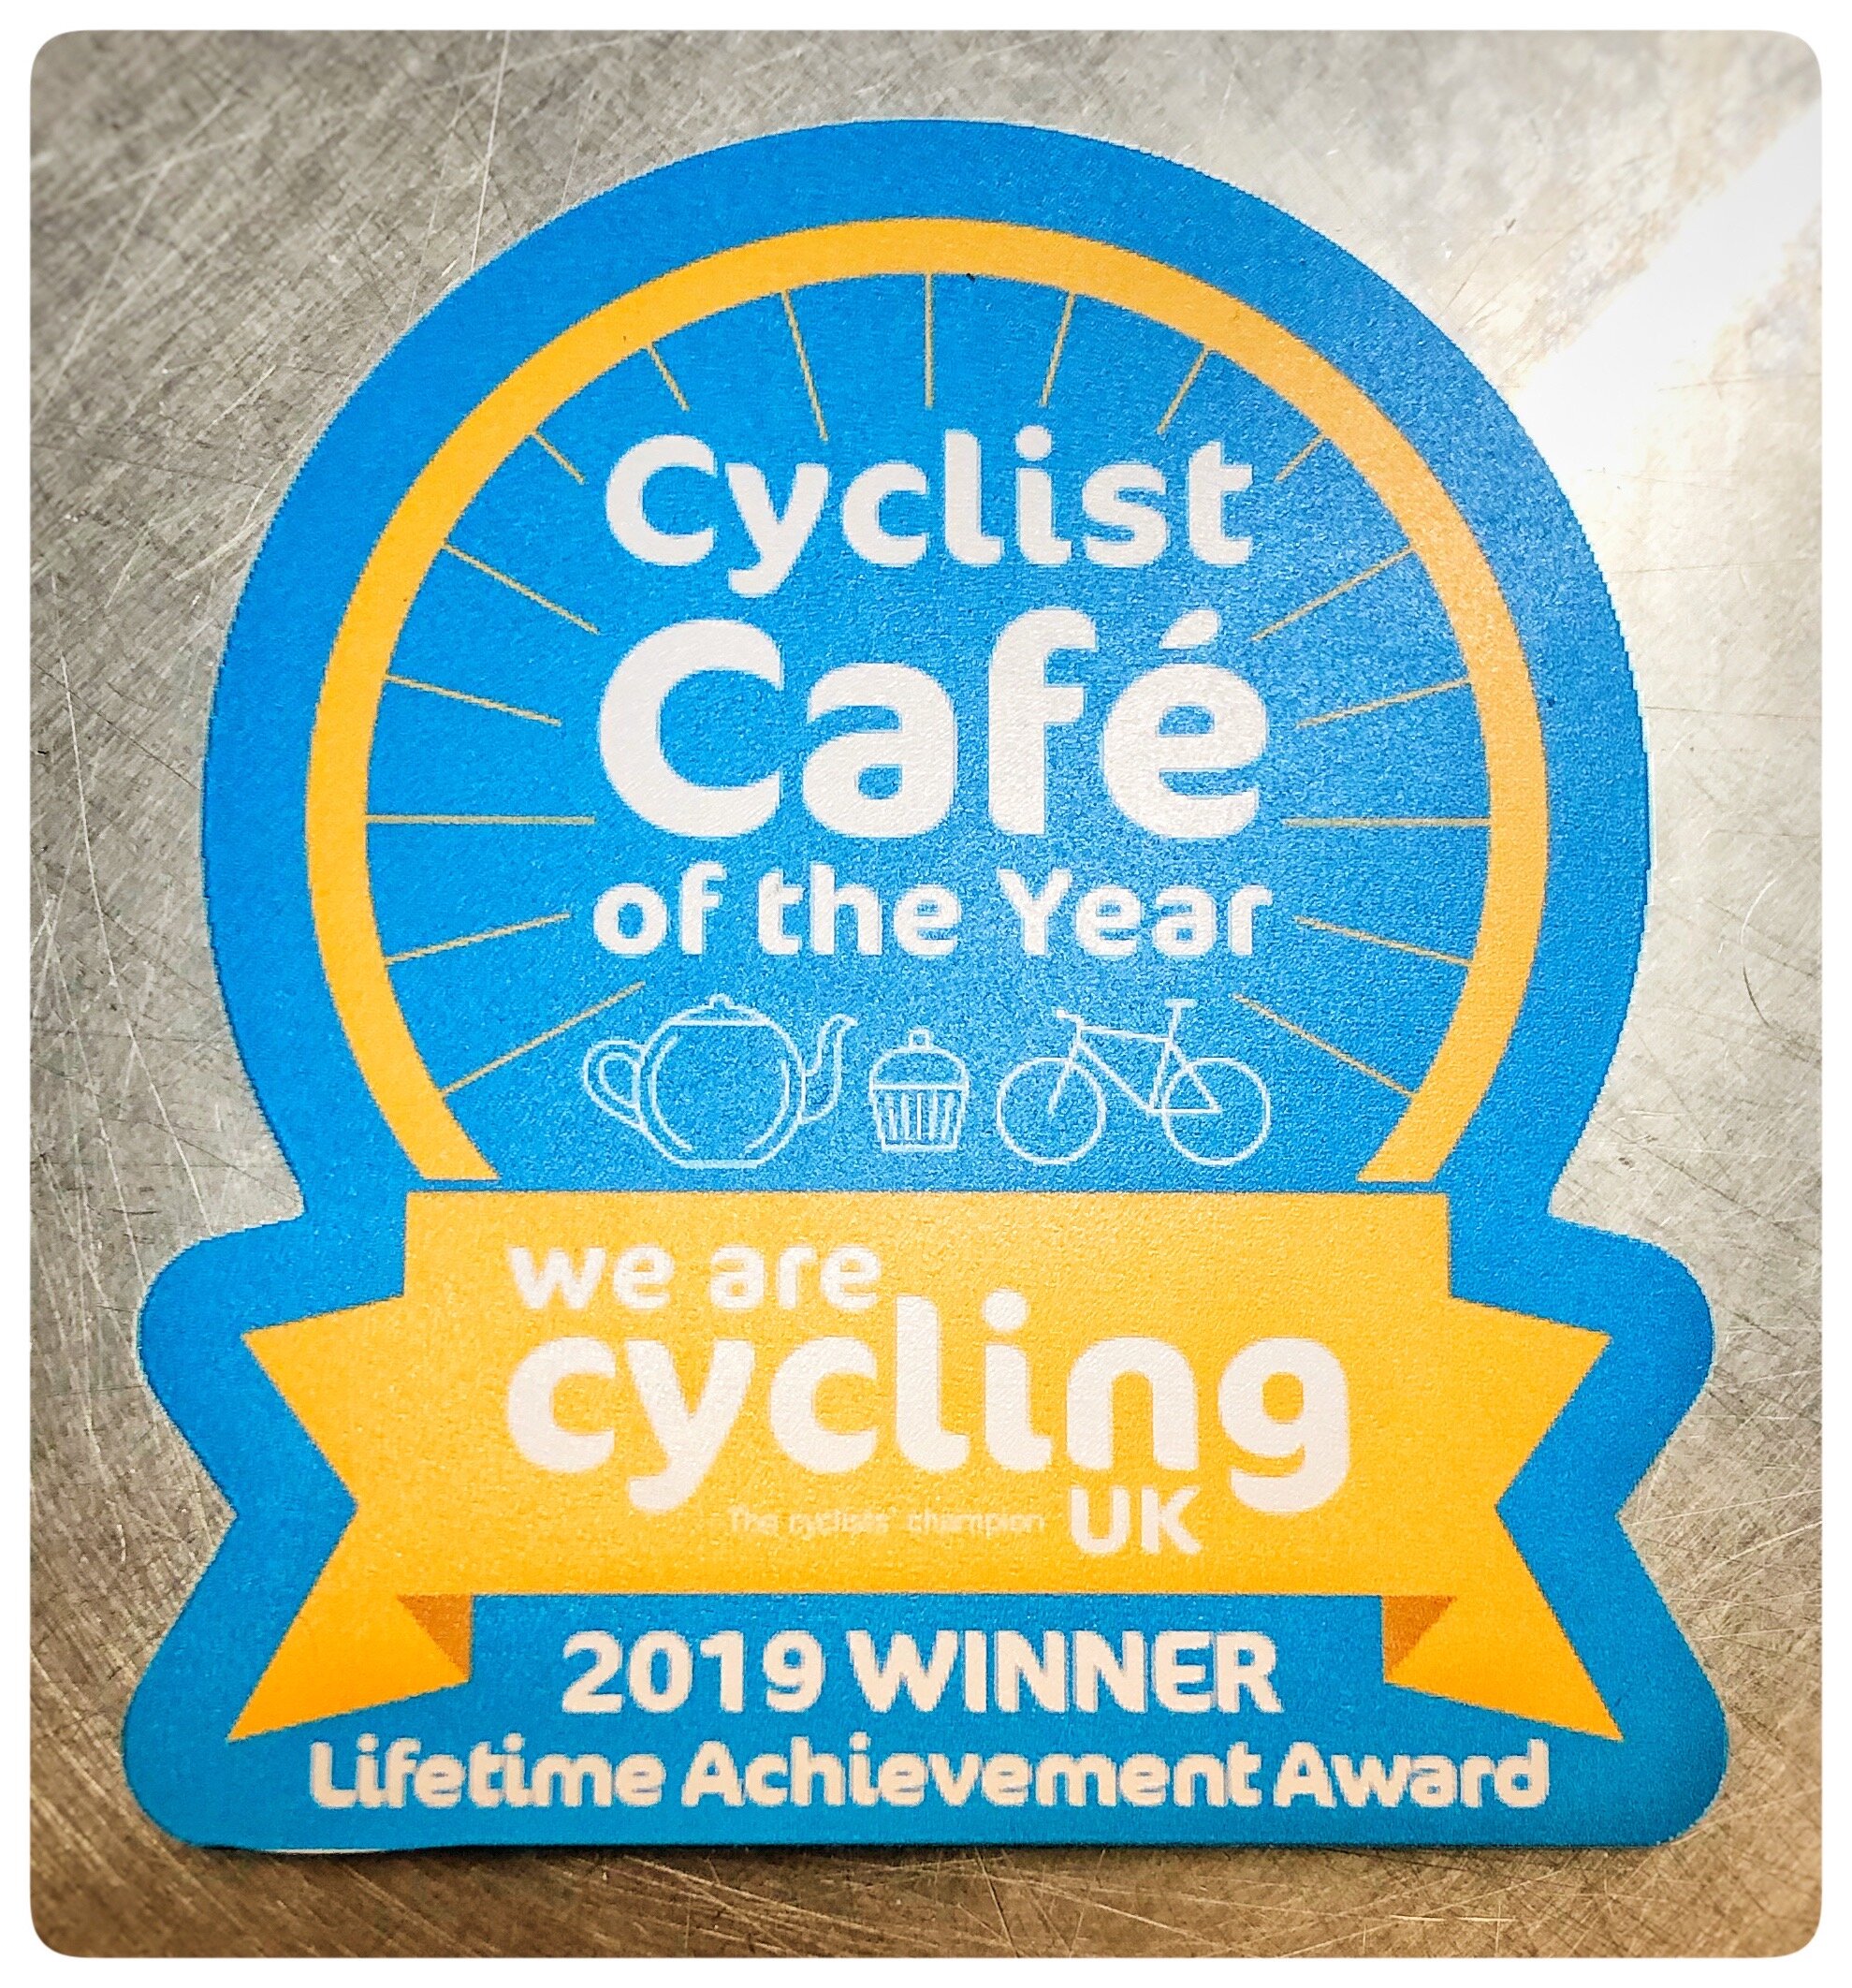 Our Cyclist Cafe of the Year Lifetime Achievement Award